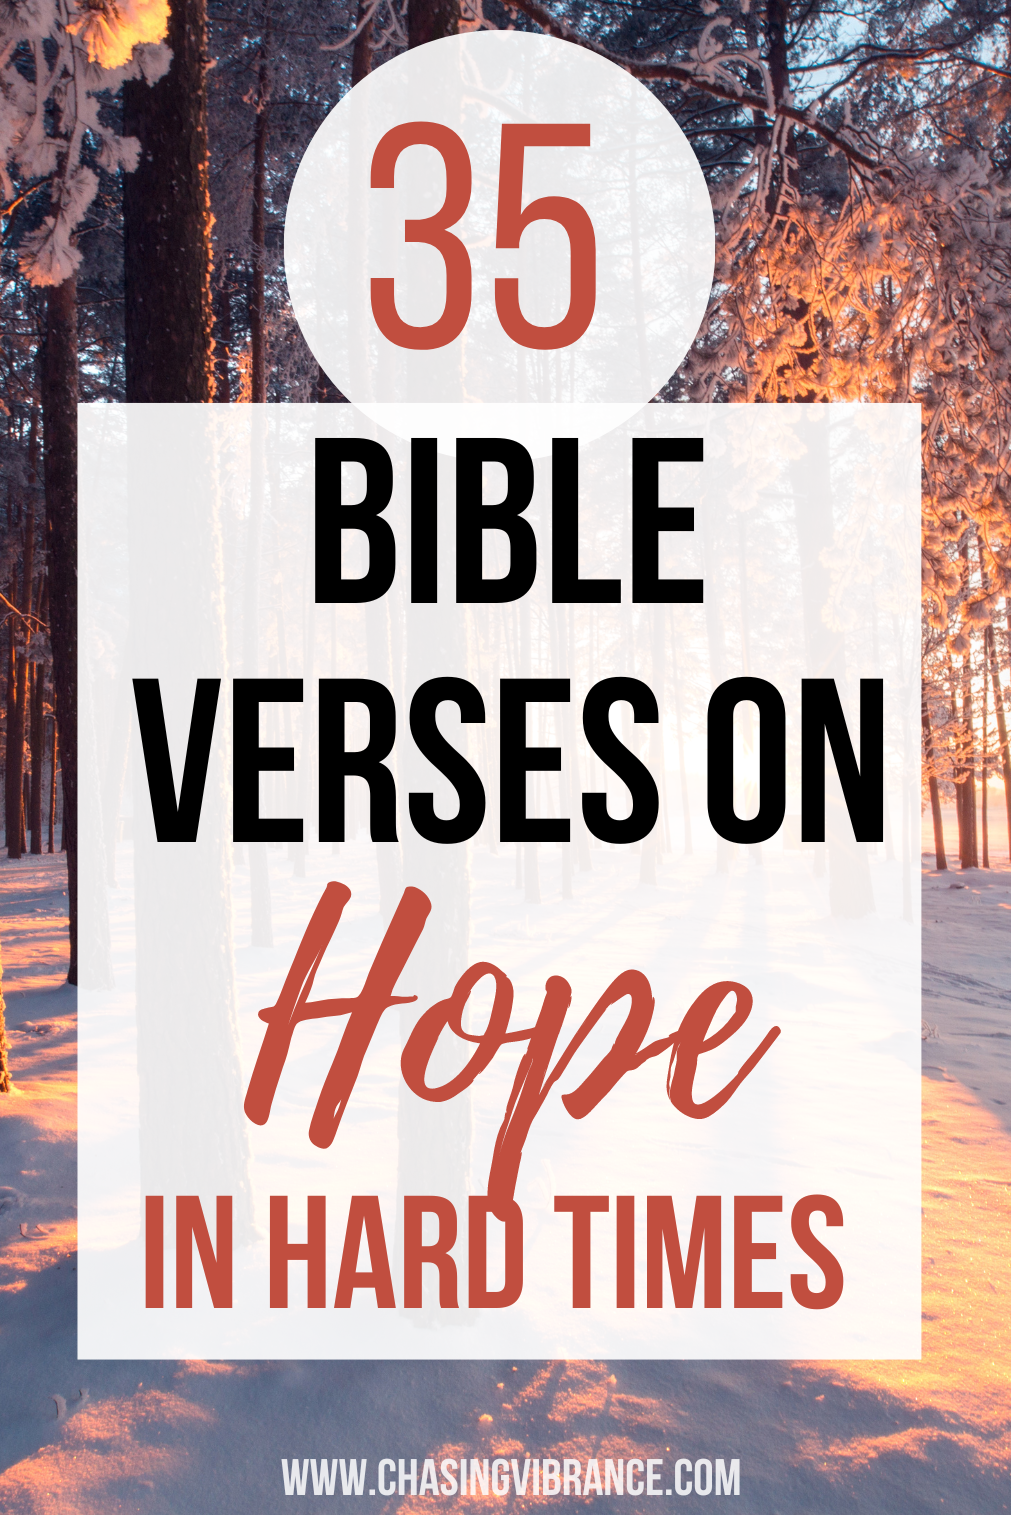 35 Bible Verses About Hope in Hard Times